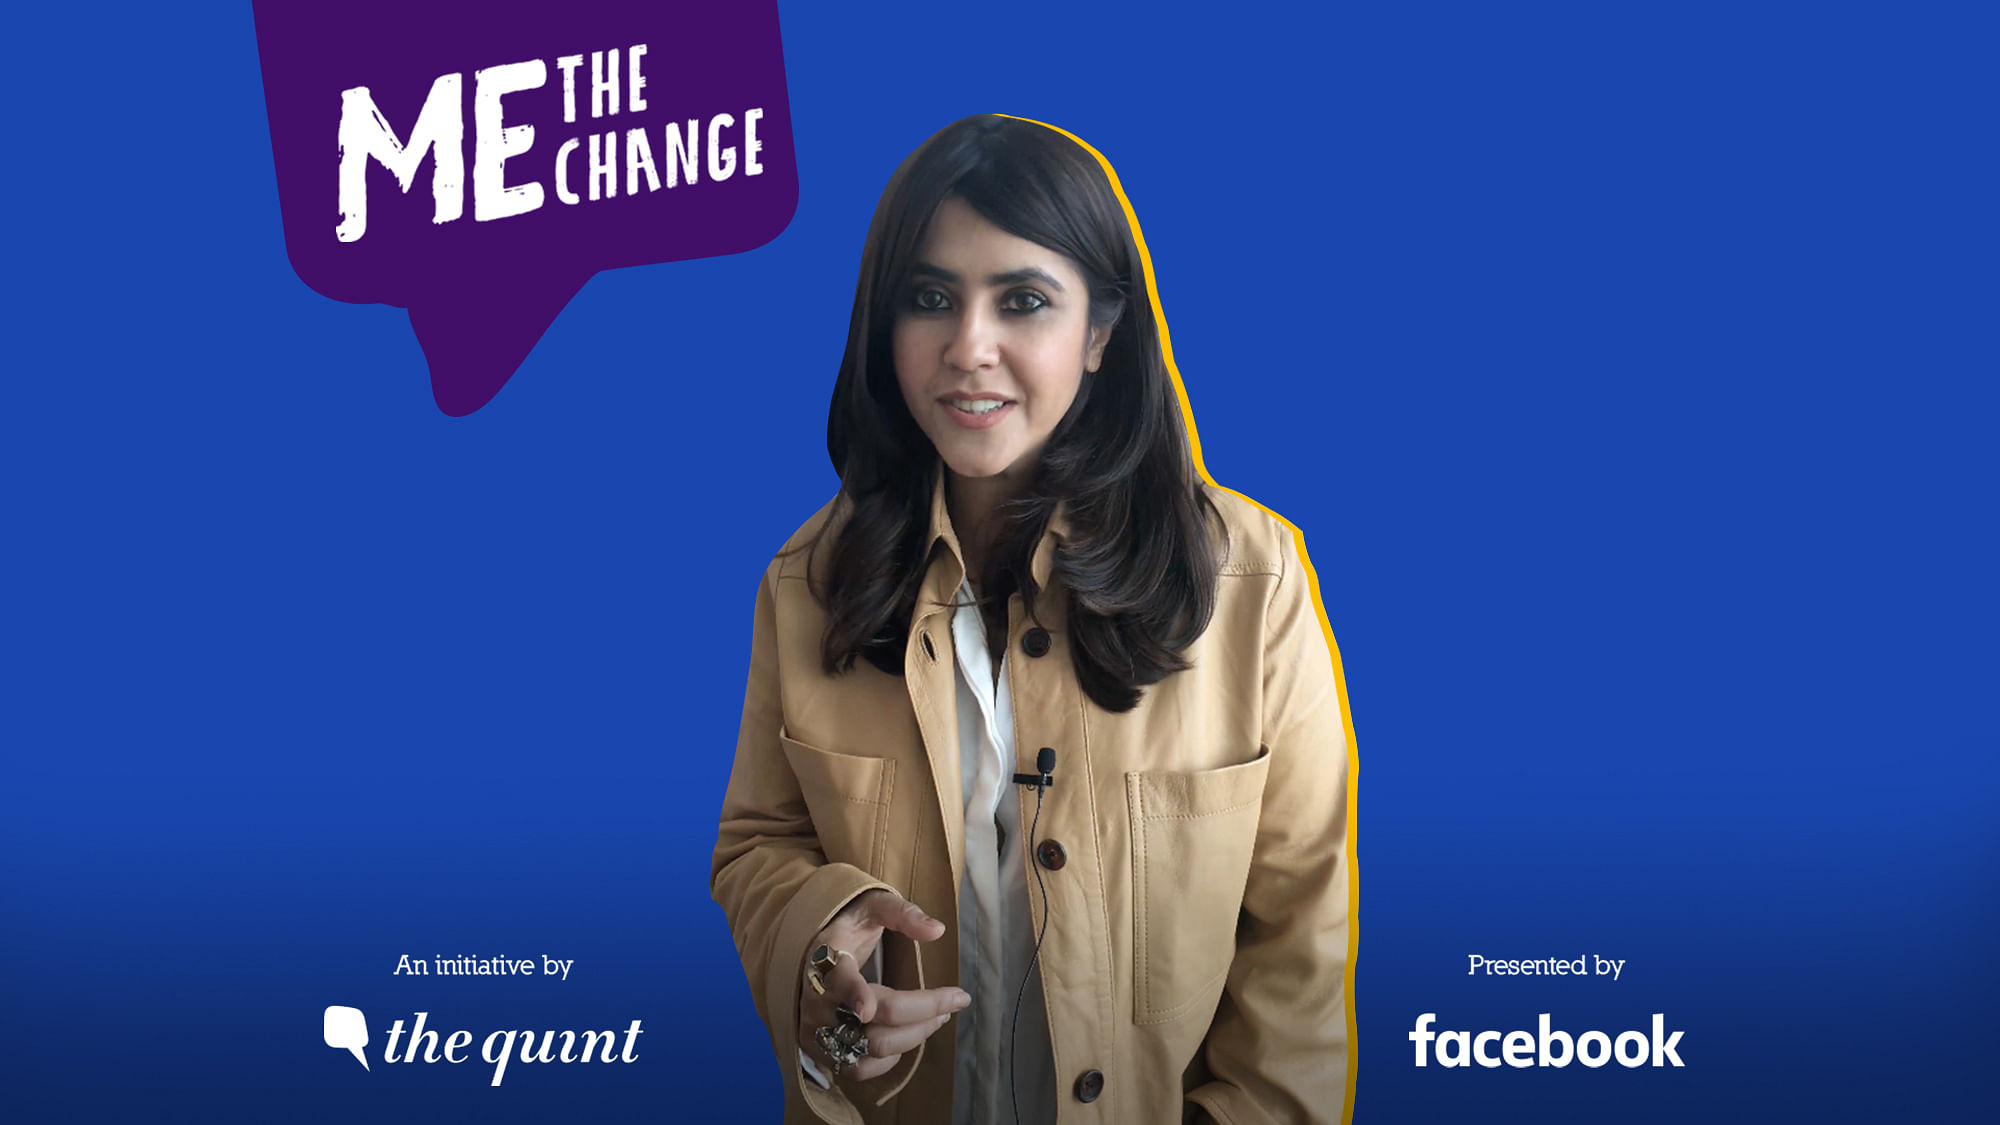 Ekta Kapoor wants you to go vote and exercise your right.